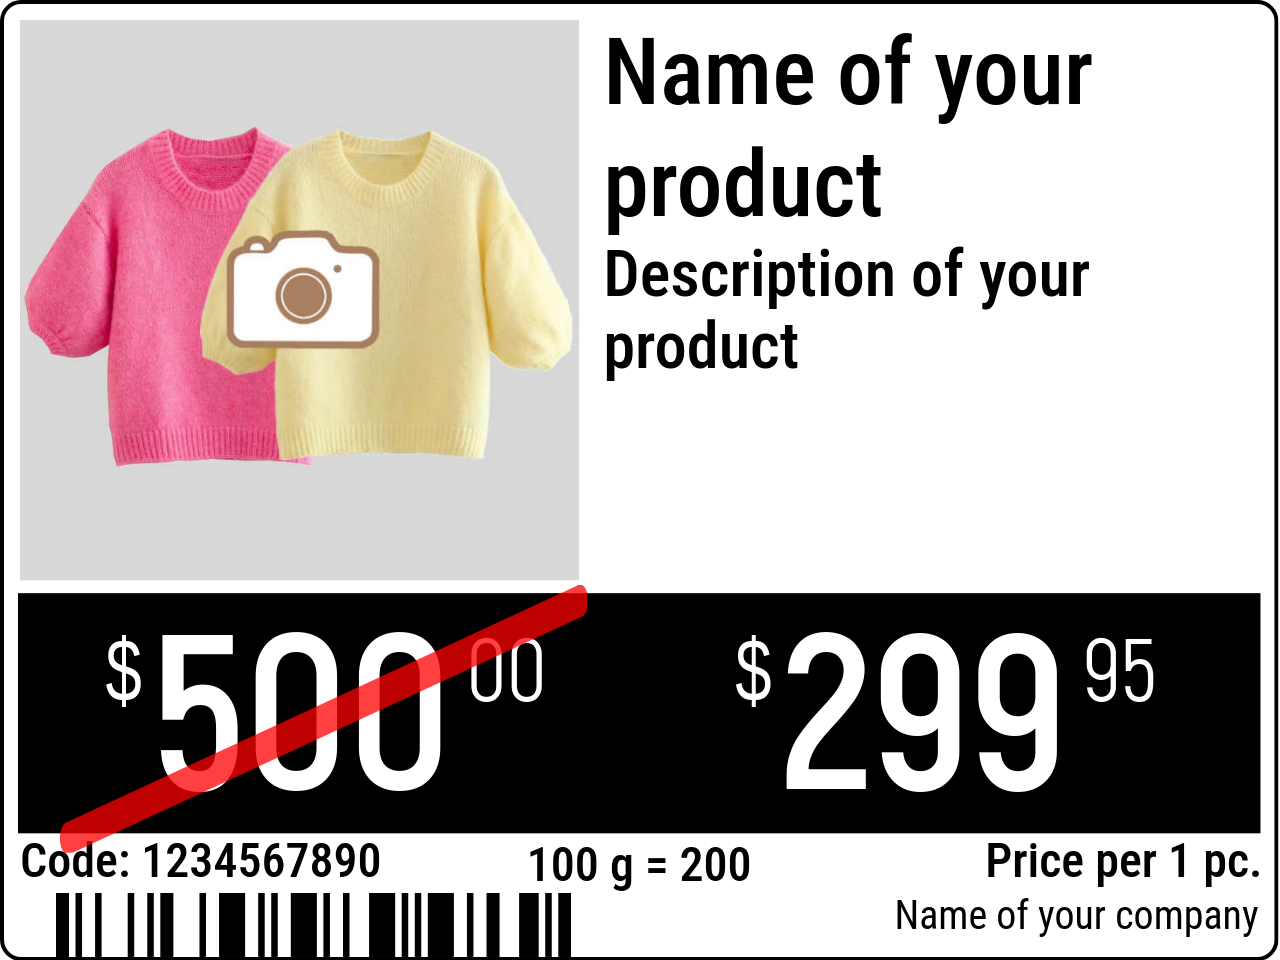 Price tag Original / Price tags with product image / Promotional